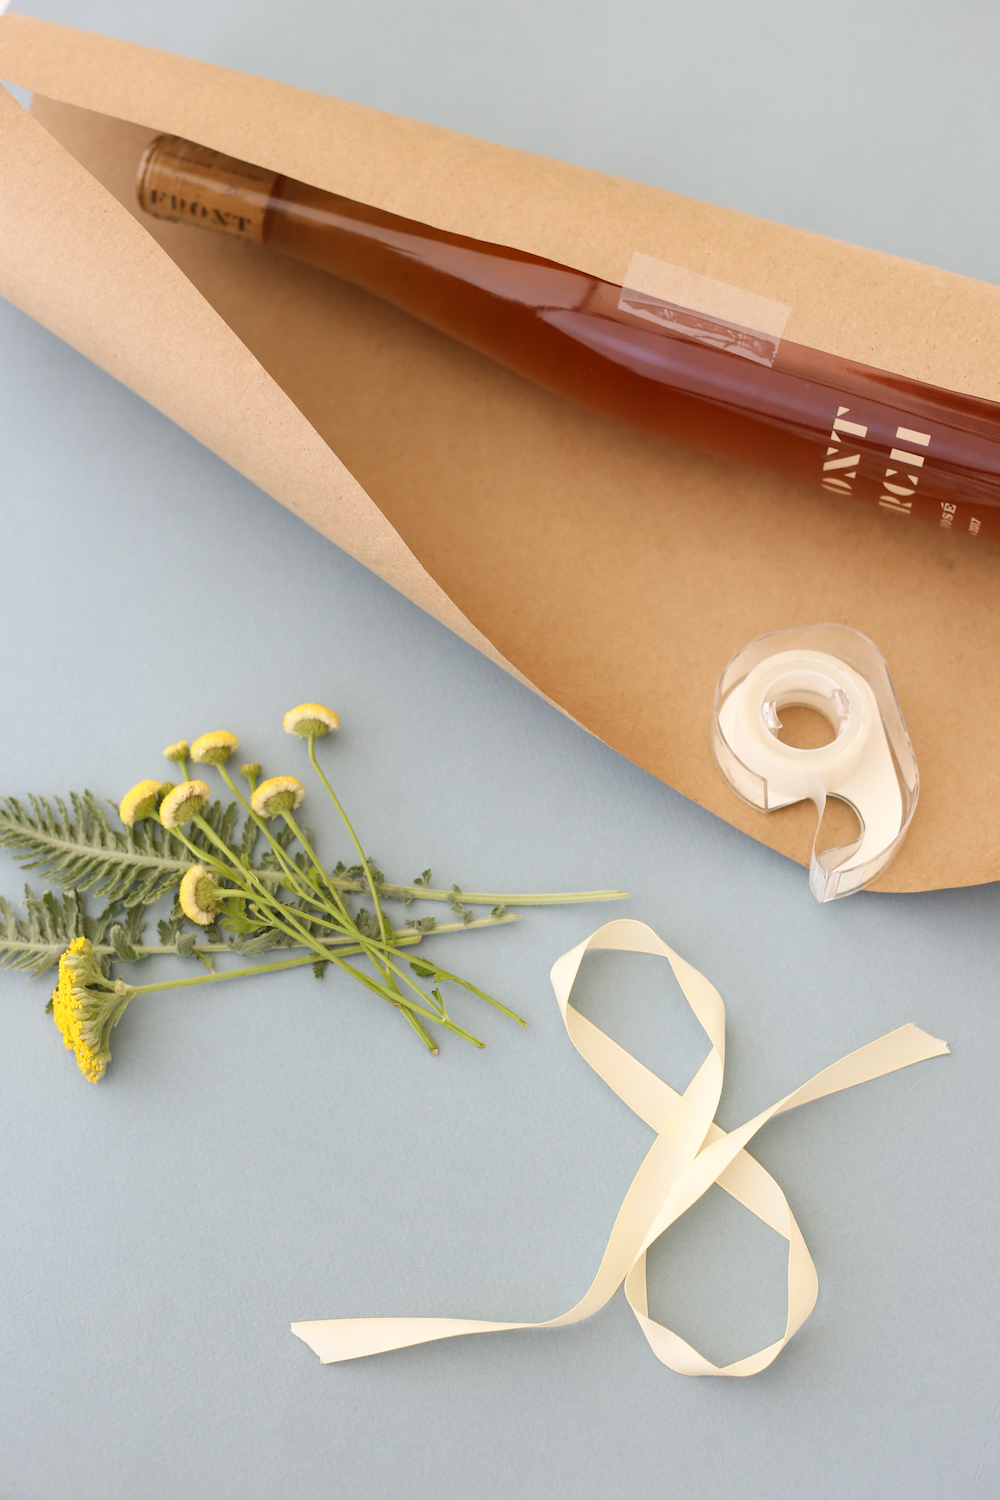 Wine bottle in craft paper with tape, flowers, and ribbon